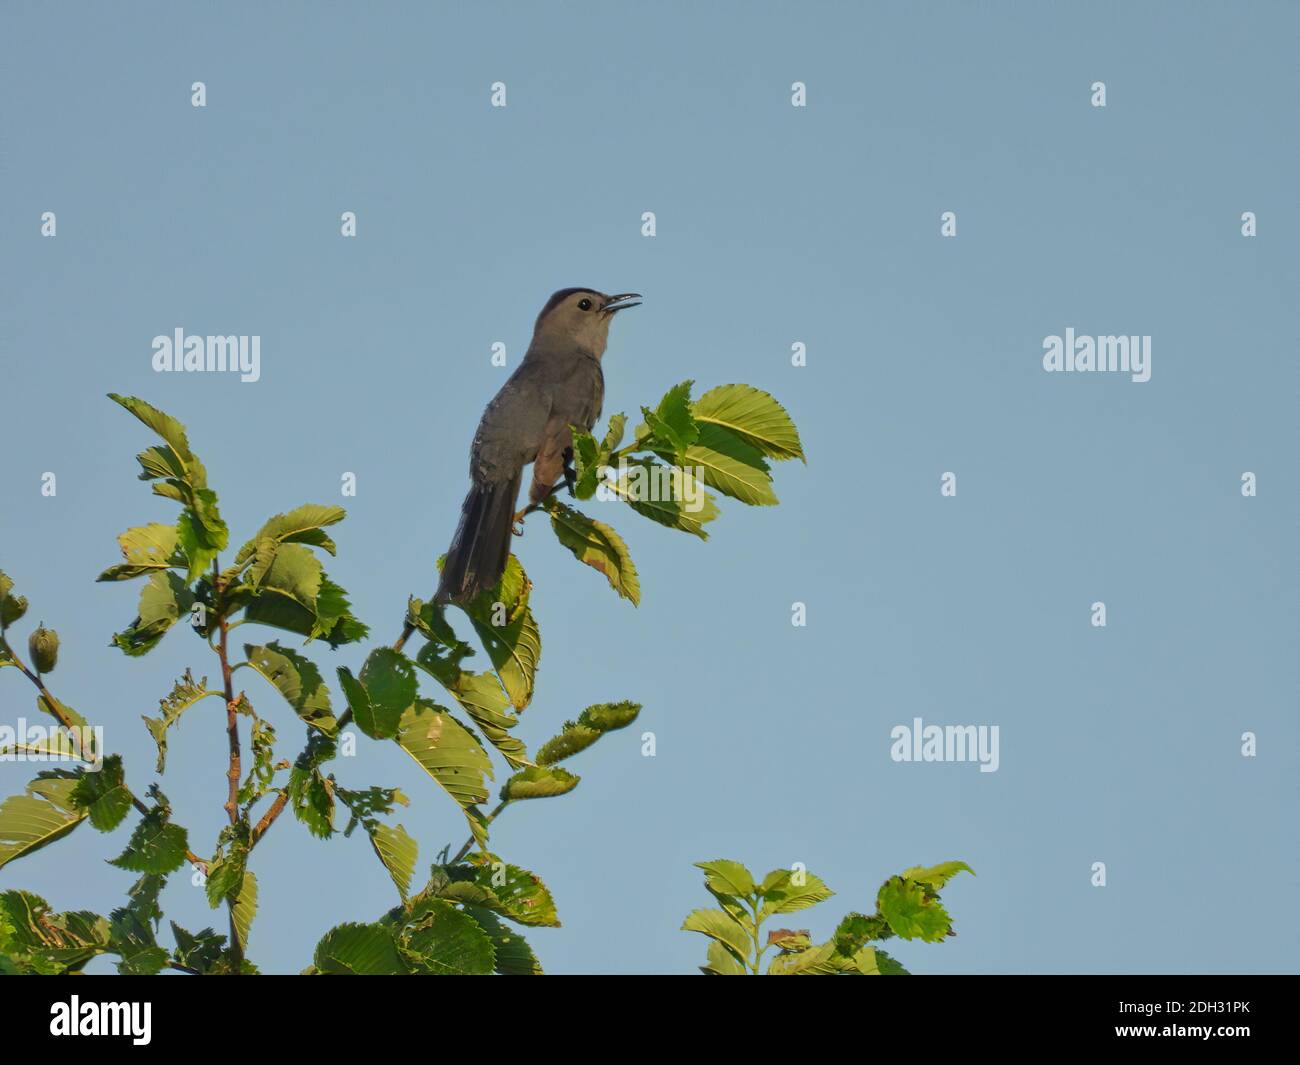 Gray Catbird Bird Perched on Elm Tree Singing with Beak Open and Looking Up to the Bright Blue Sky in the Background Stock Photo